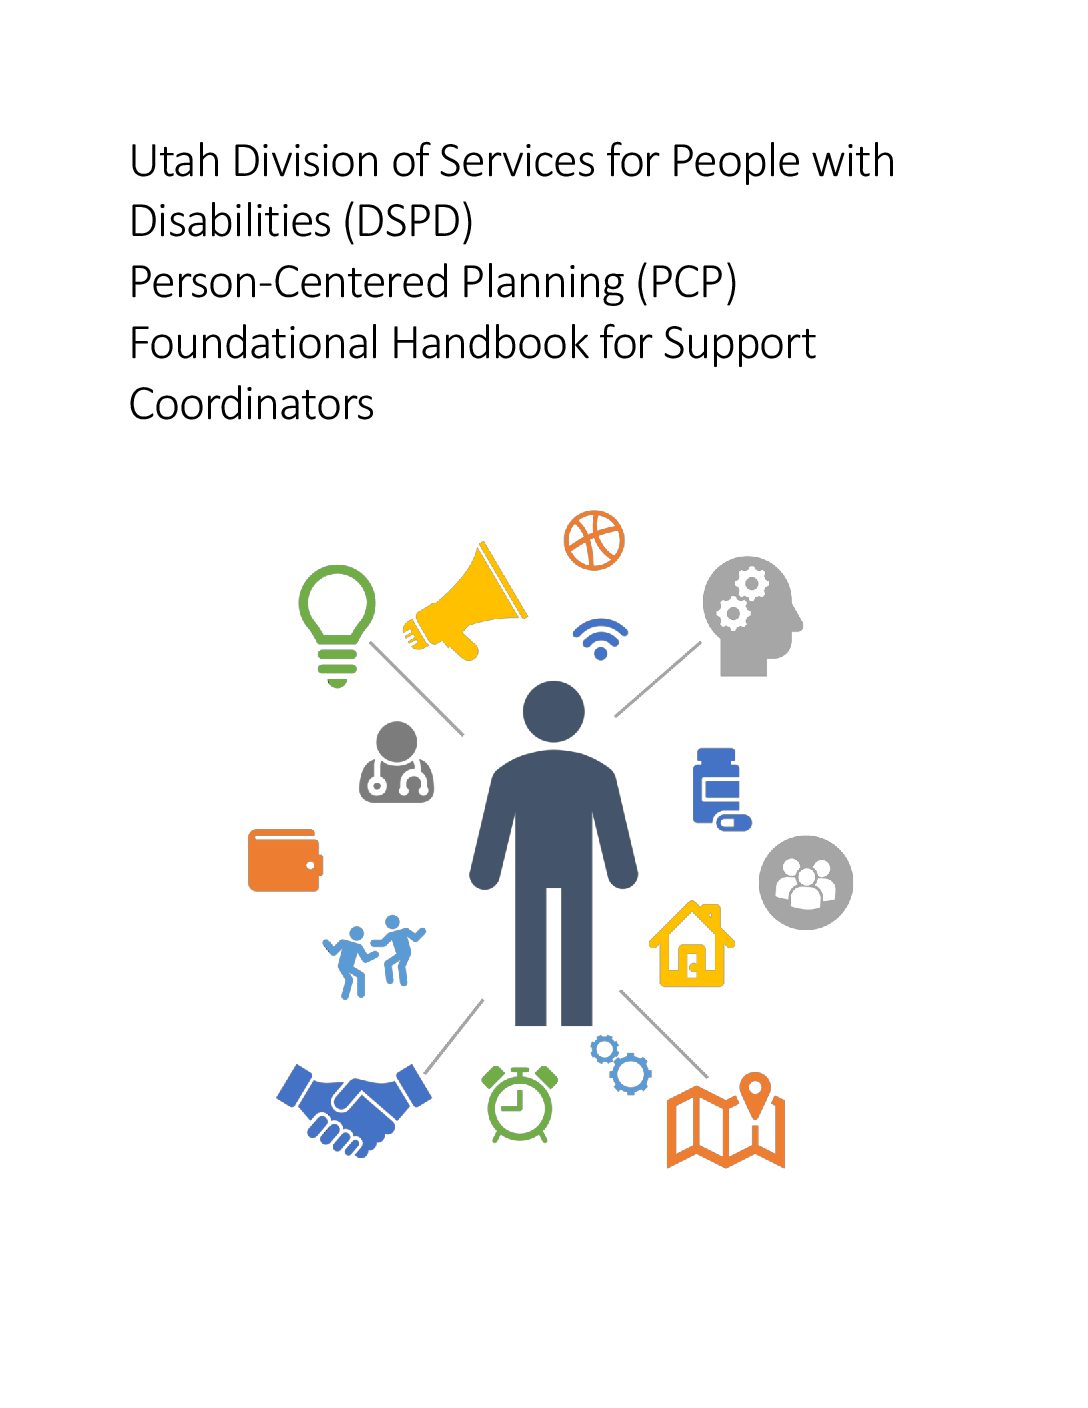 Foundational Handbook for Support Coordinators <span class="visually-hidden">opens in a new tab</span>